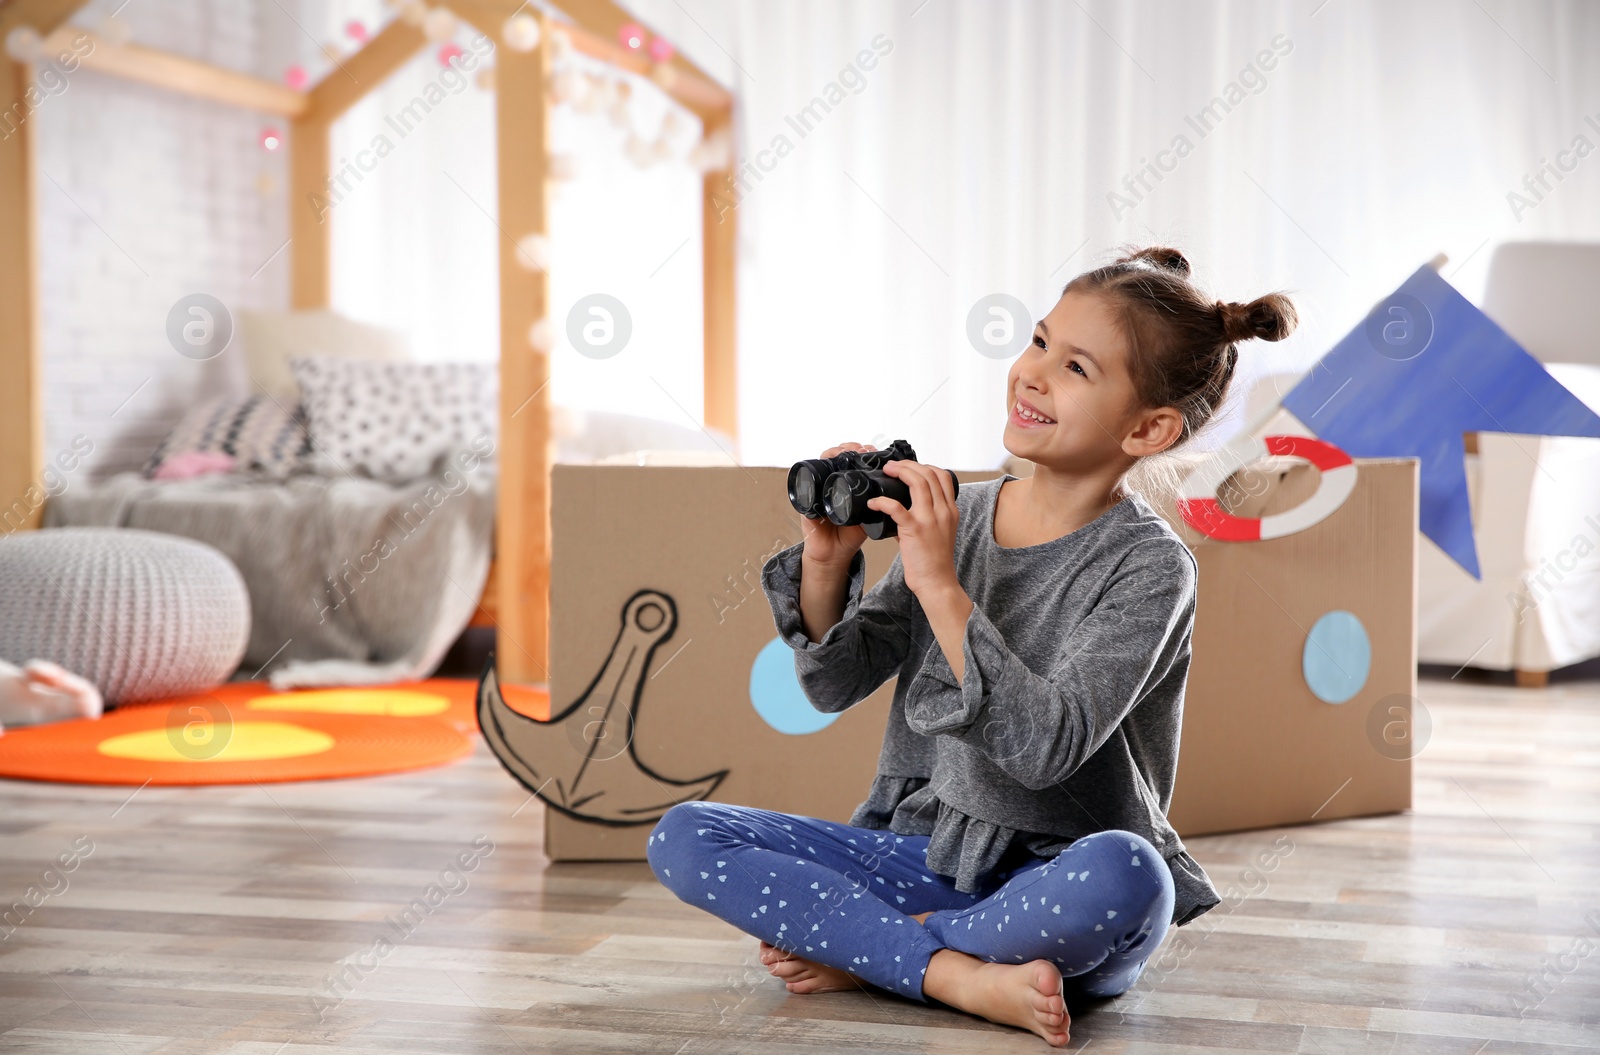 Photo of Cute little girl playing with binoculars and cardboard boat in bedroom